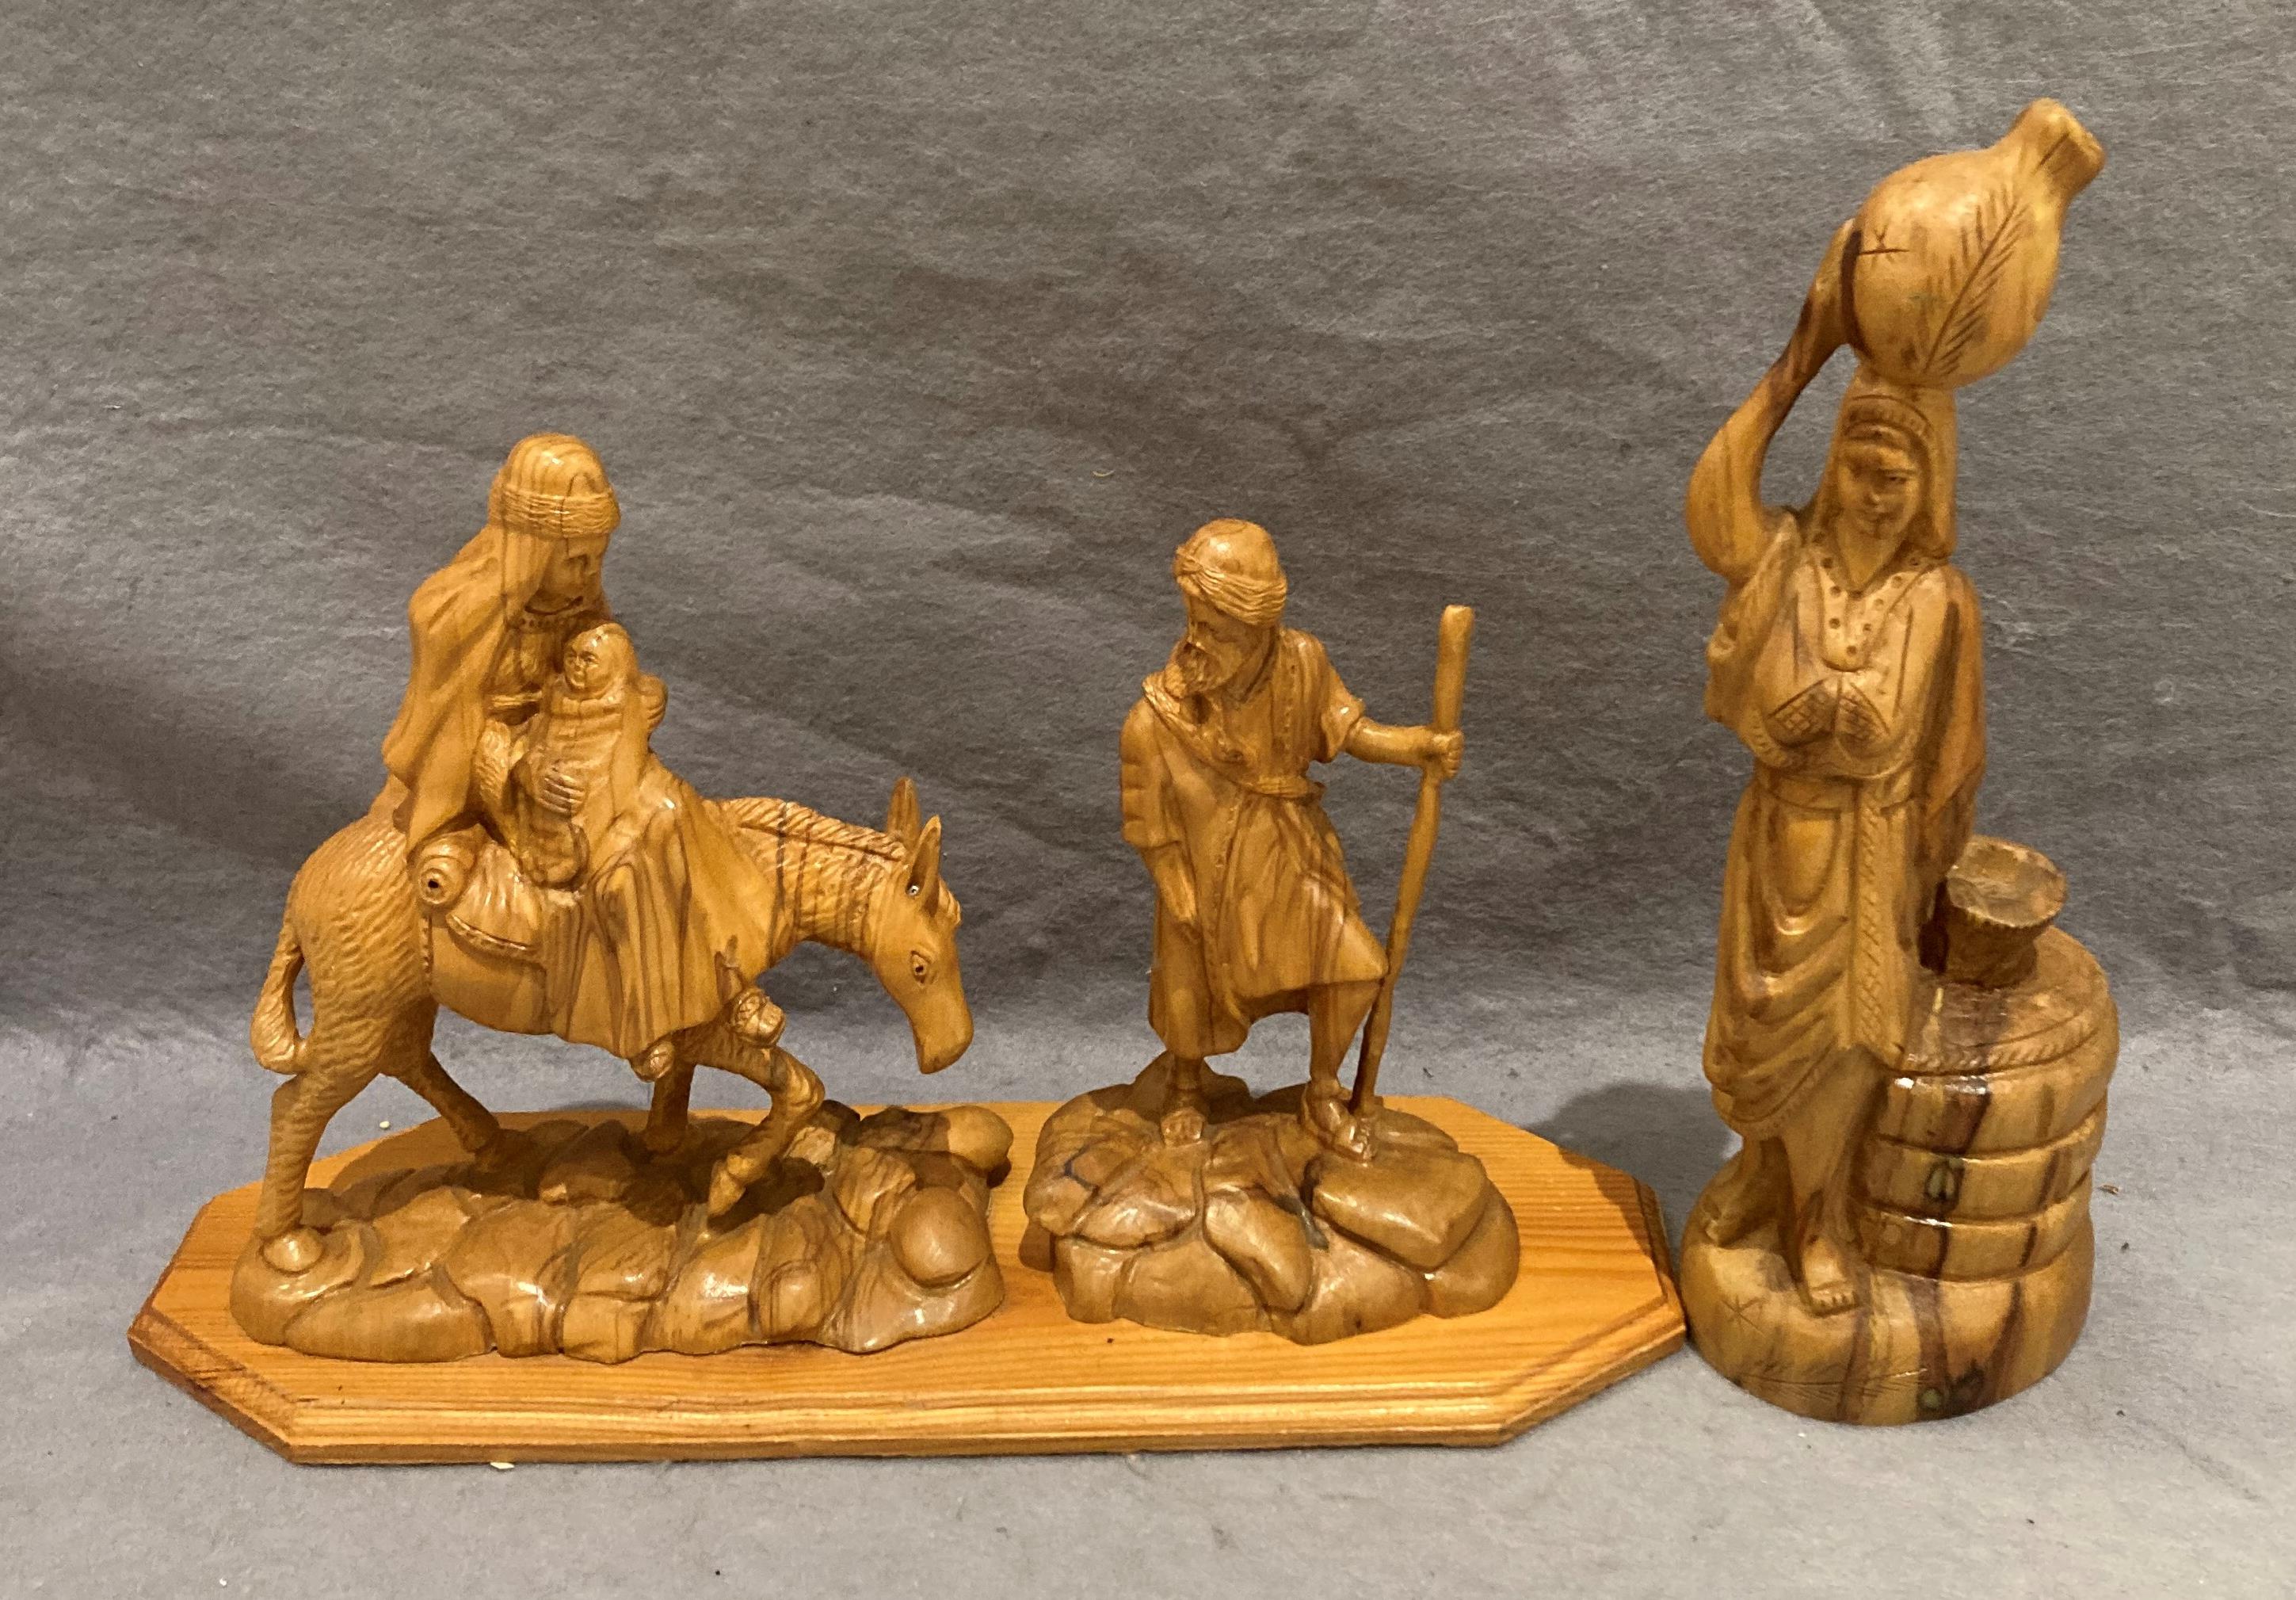 A hand-carved olive wood 'Flight to Egypt' religious carving on wooden plinth (35cm x 22cm high)